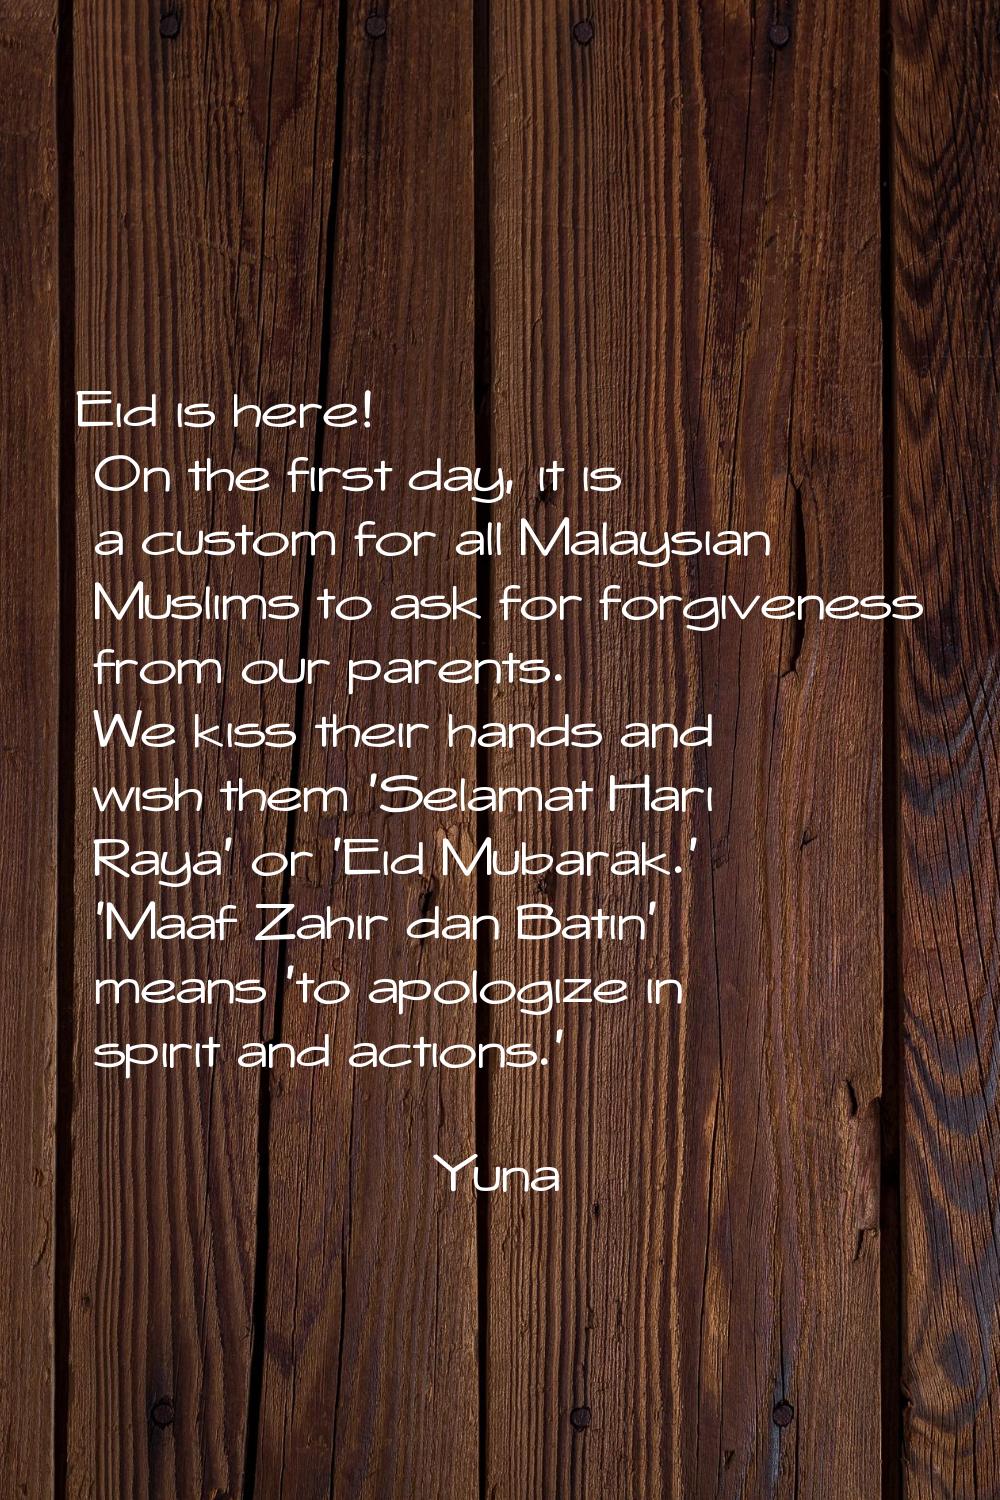 Eid is here! On the first day, it is a custom for all Malaysian Muslims to ask for forgiveness from